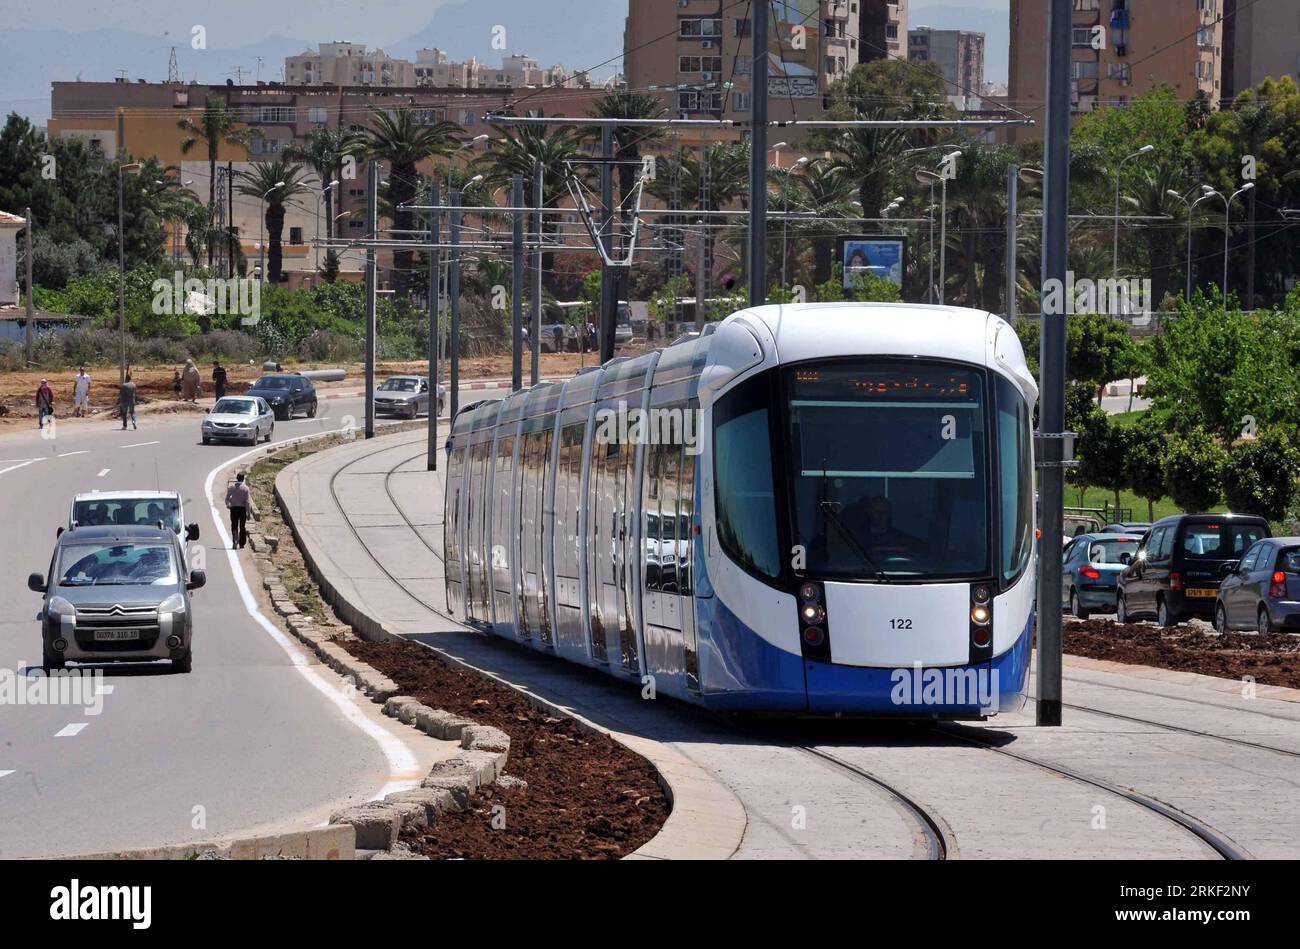 Bildnummer: 55330140  Datum: 08.05.2011  Copyright: imago/Xinhua (110508) -- ALGIERS, May 8, 2011 (Xinhua) -- A train runs on the tramway in Algiers, Algeria, on May 8, 2011. The first section of the Algiers tramway linking Bordj El Kiffan to les Bananiers in Mohammedia, was brought into service on Sunday. Consisting of 13 stations, the 7.2 km long double track section has 12 trains, large enough to carry between 10,000 and 15,000 per day. (Xinhua/Mohamed Kadri) (wjd) ALGERIA-ALGIERS-TRAMWAY PUBLICATIONxNOTxINxCHN Wirtschaft Schienenfahrzeugbau kbdig xkg 2011 quer o0 Straßenbahn, Straße, Verke Stock Photo